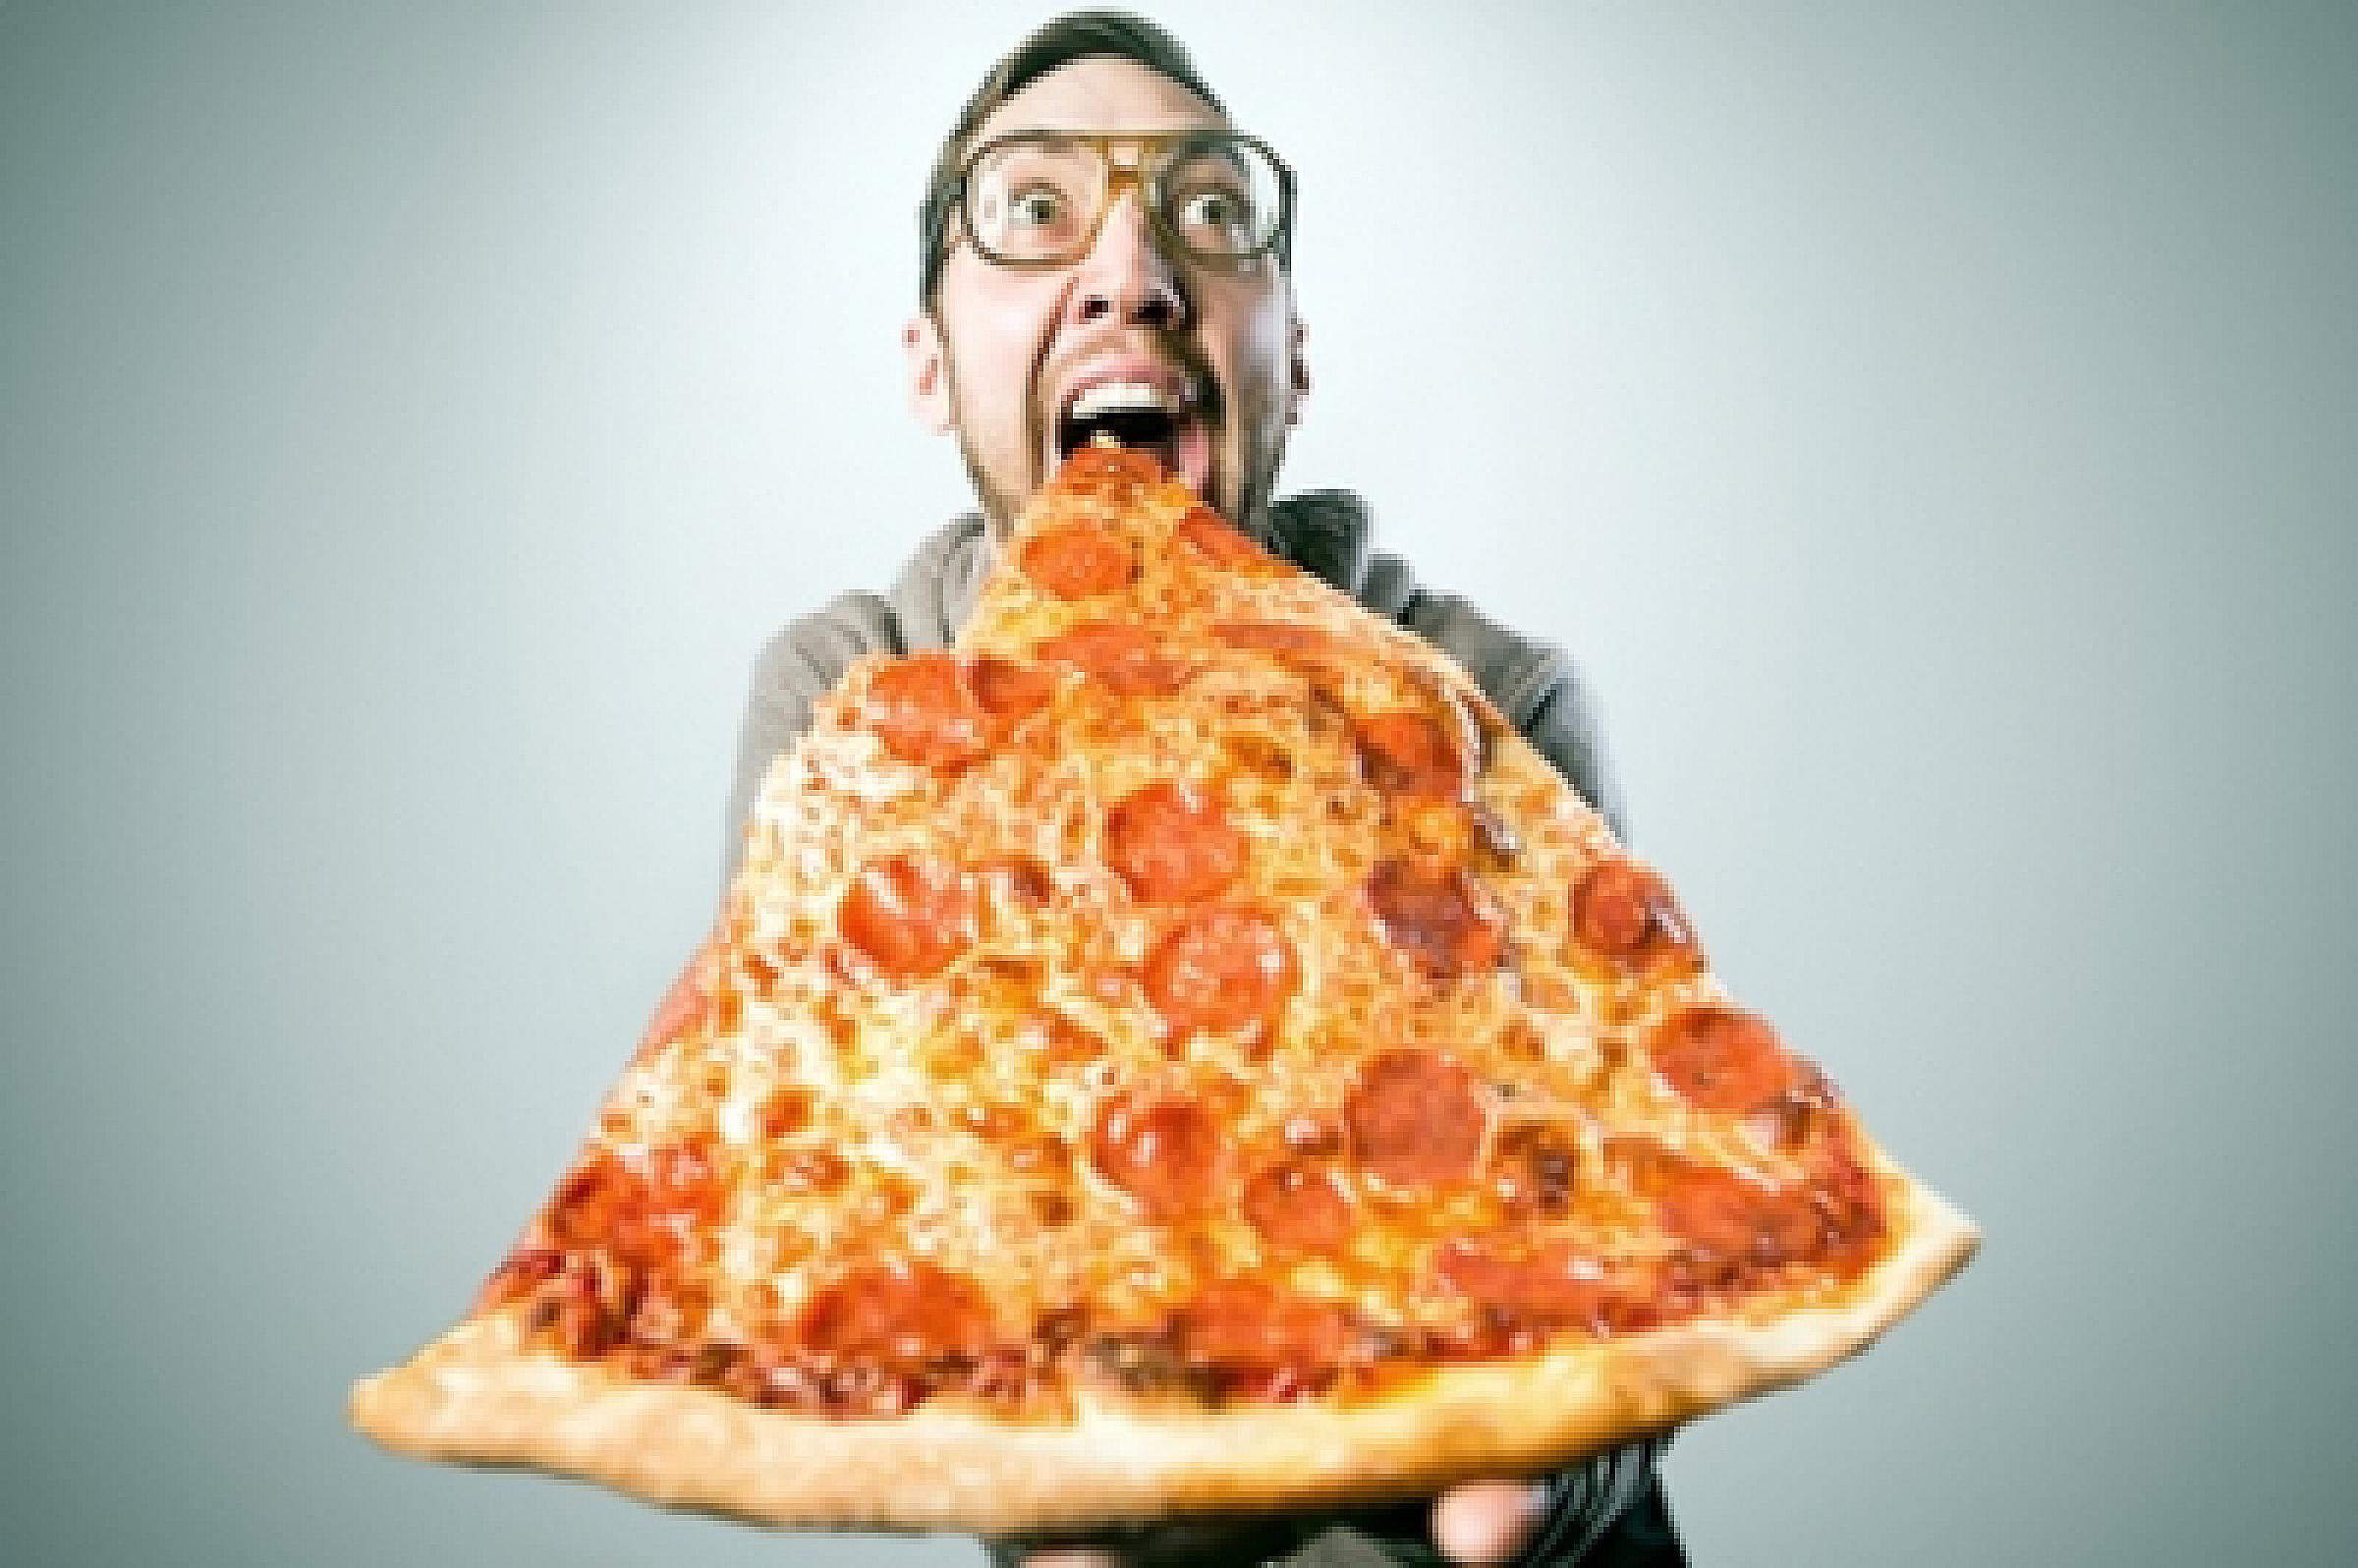 Man eating pizza